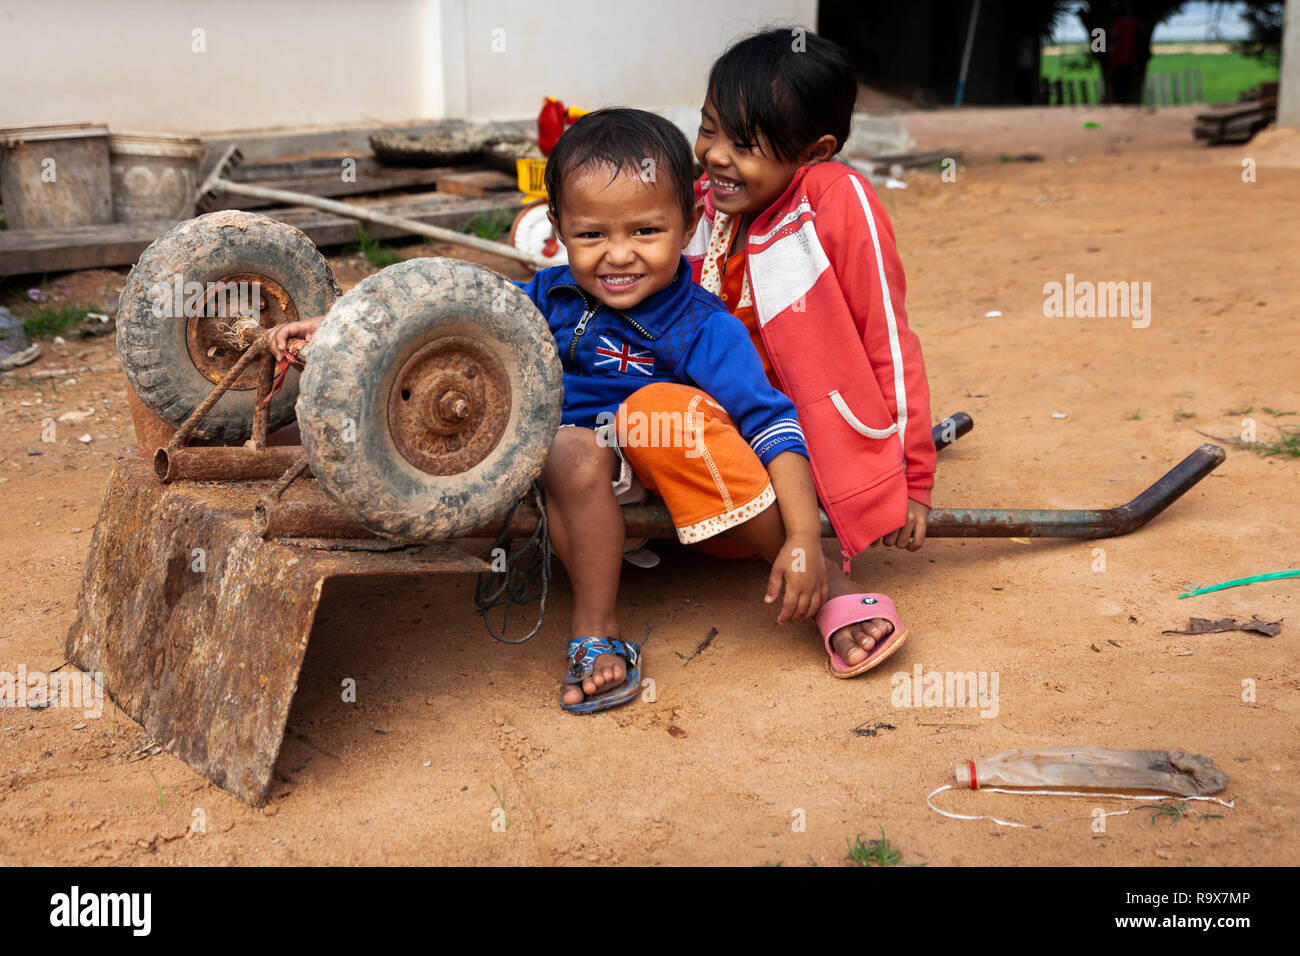 Two kids playing with a wheelbarrow outside Stock Photo